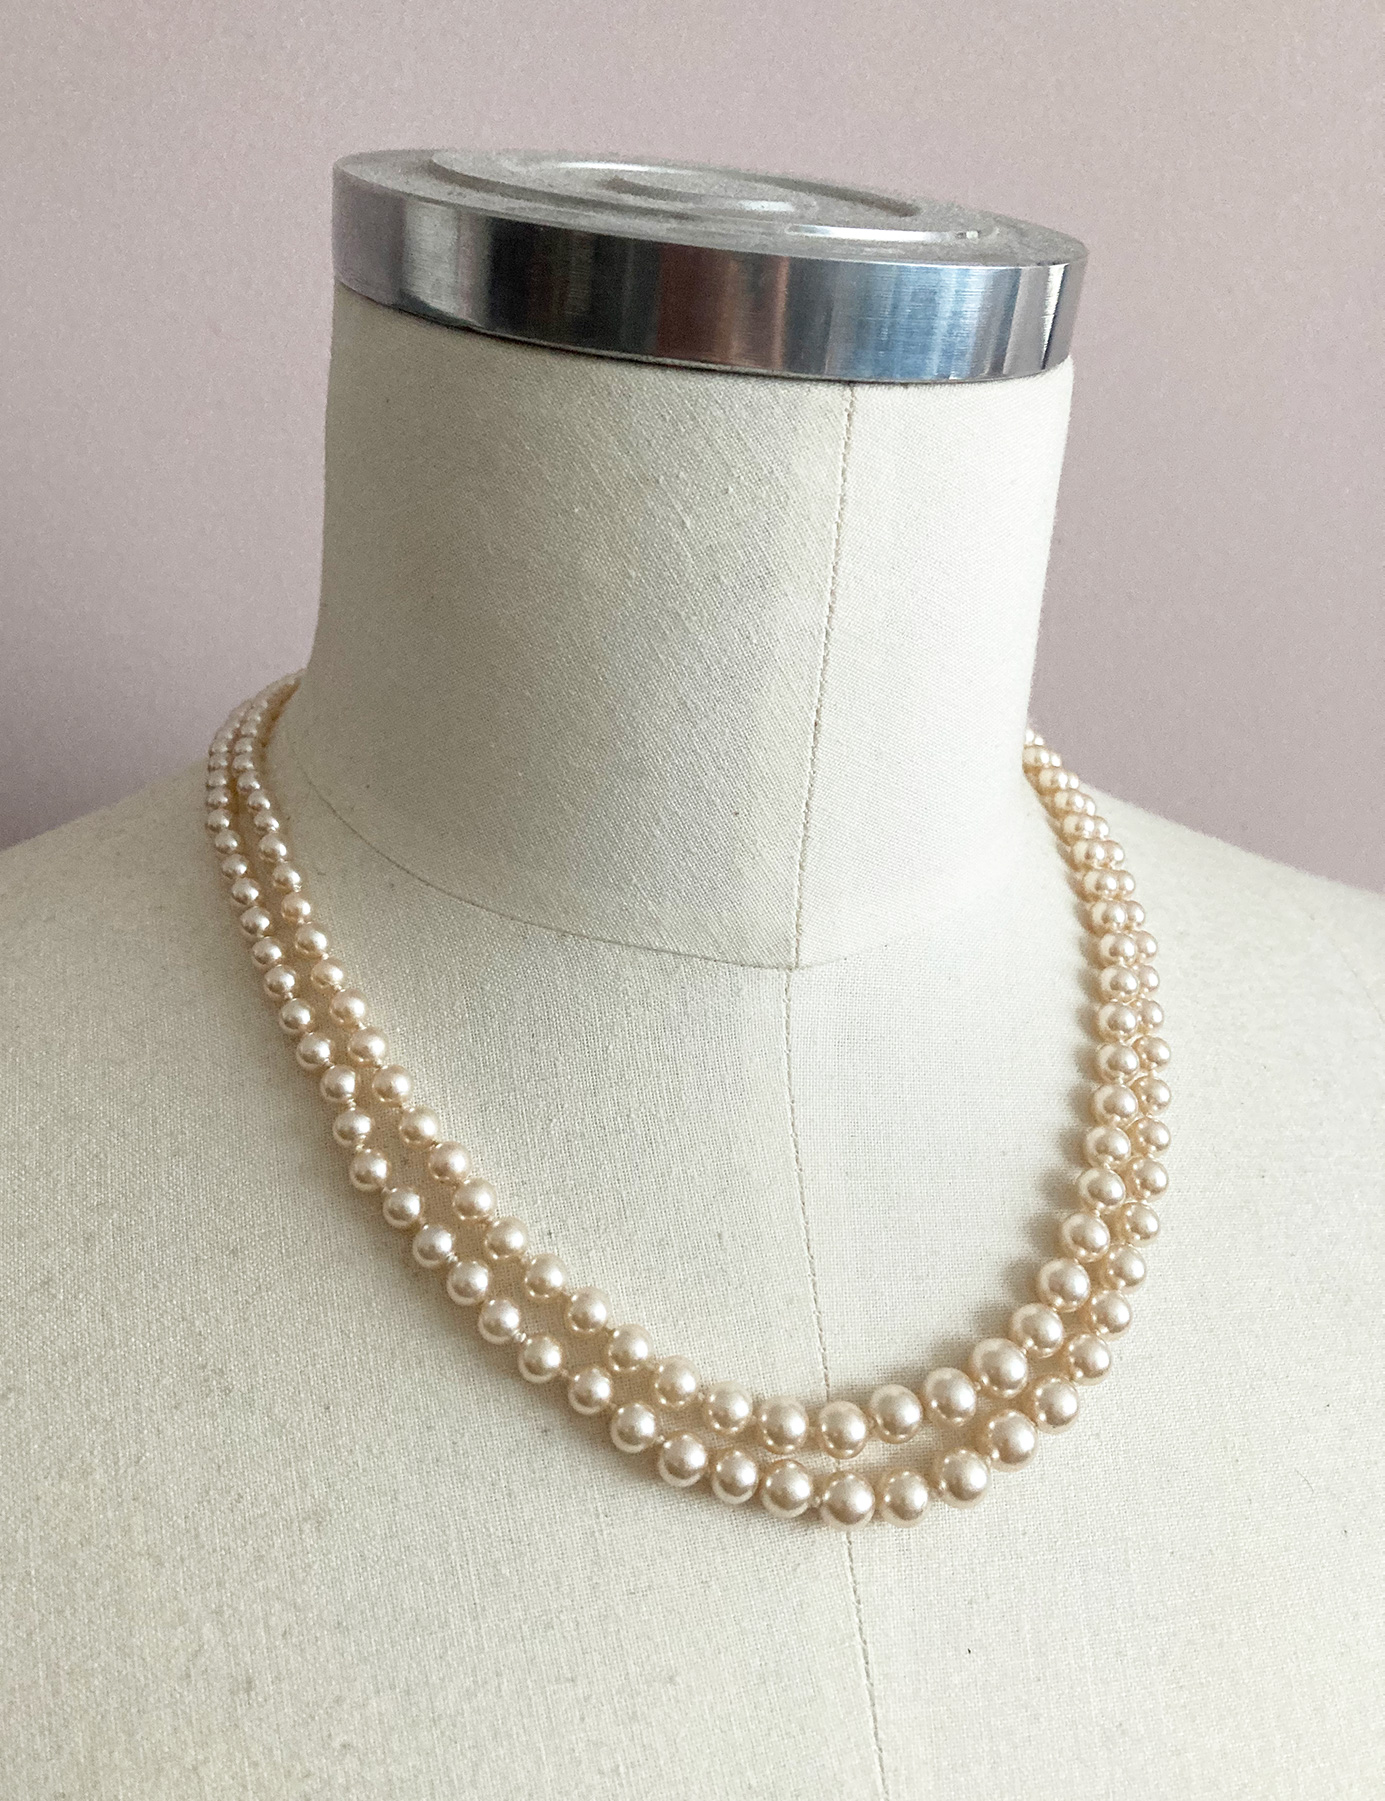 vintage Art Deco pearl necklace with twi rows and silver clasp